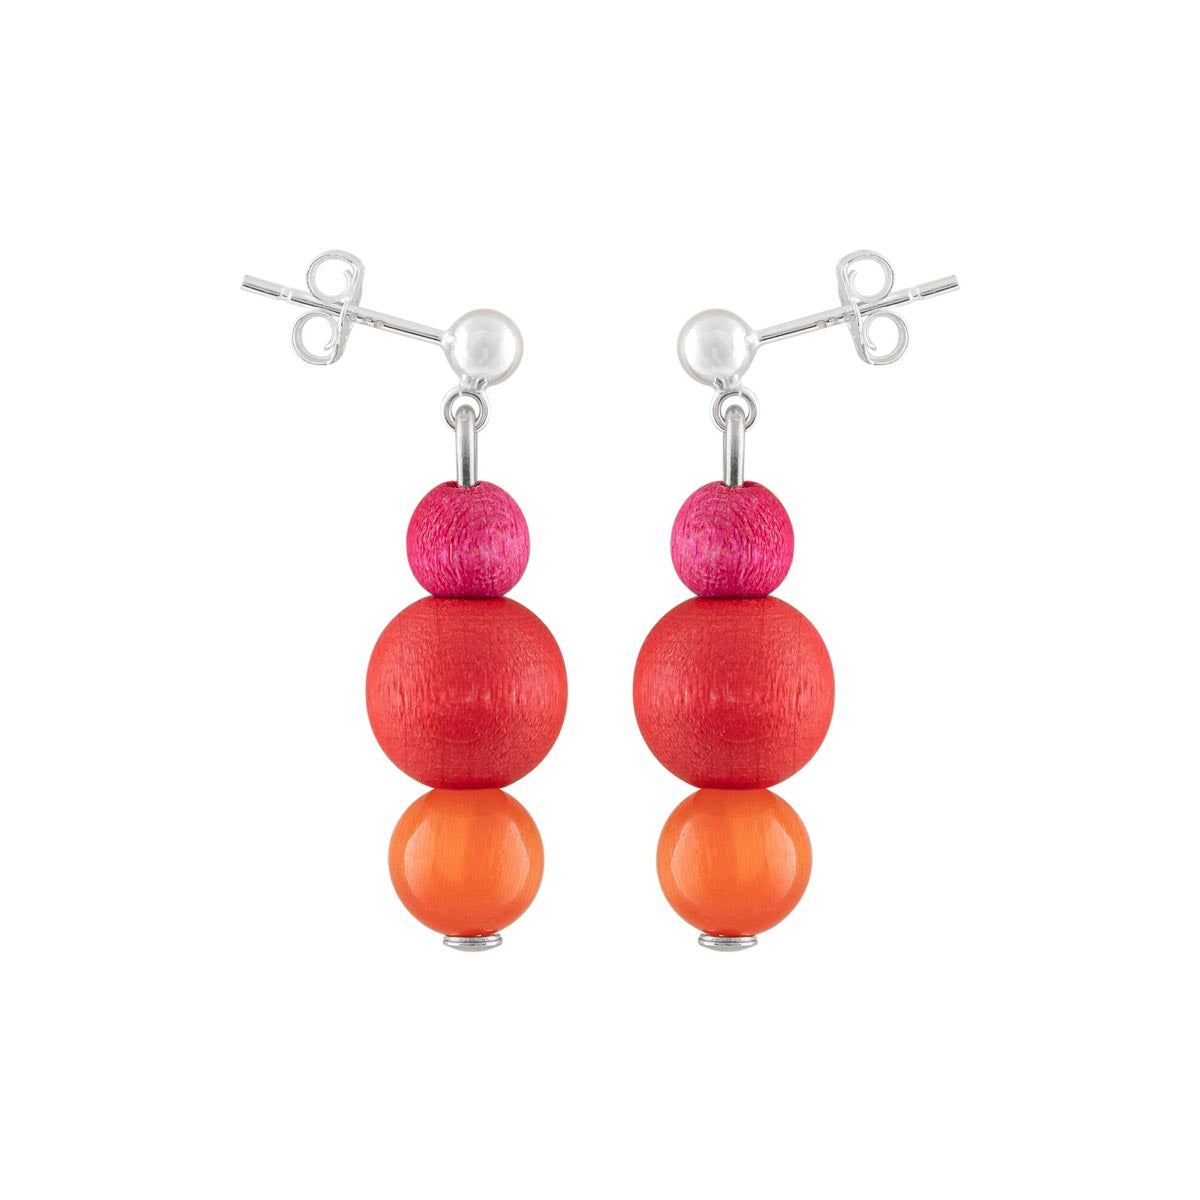 Irene earrings, shades of red